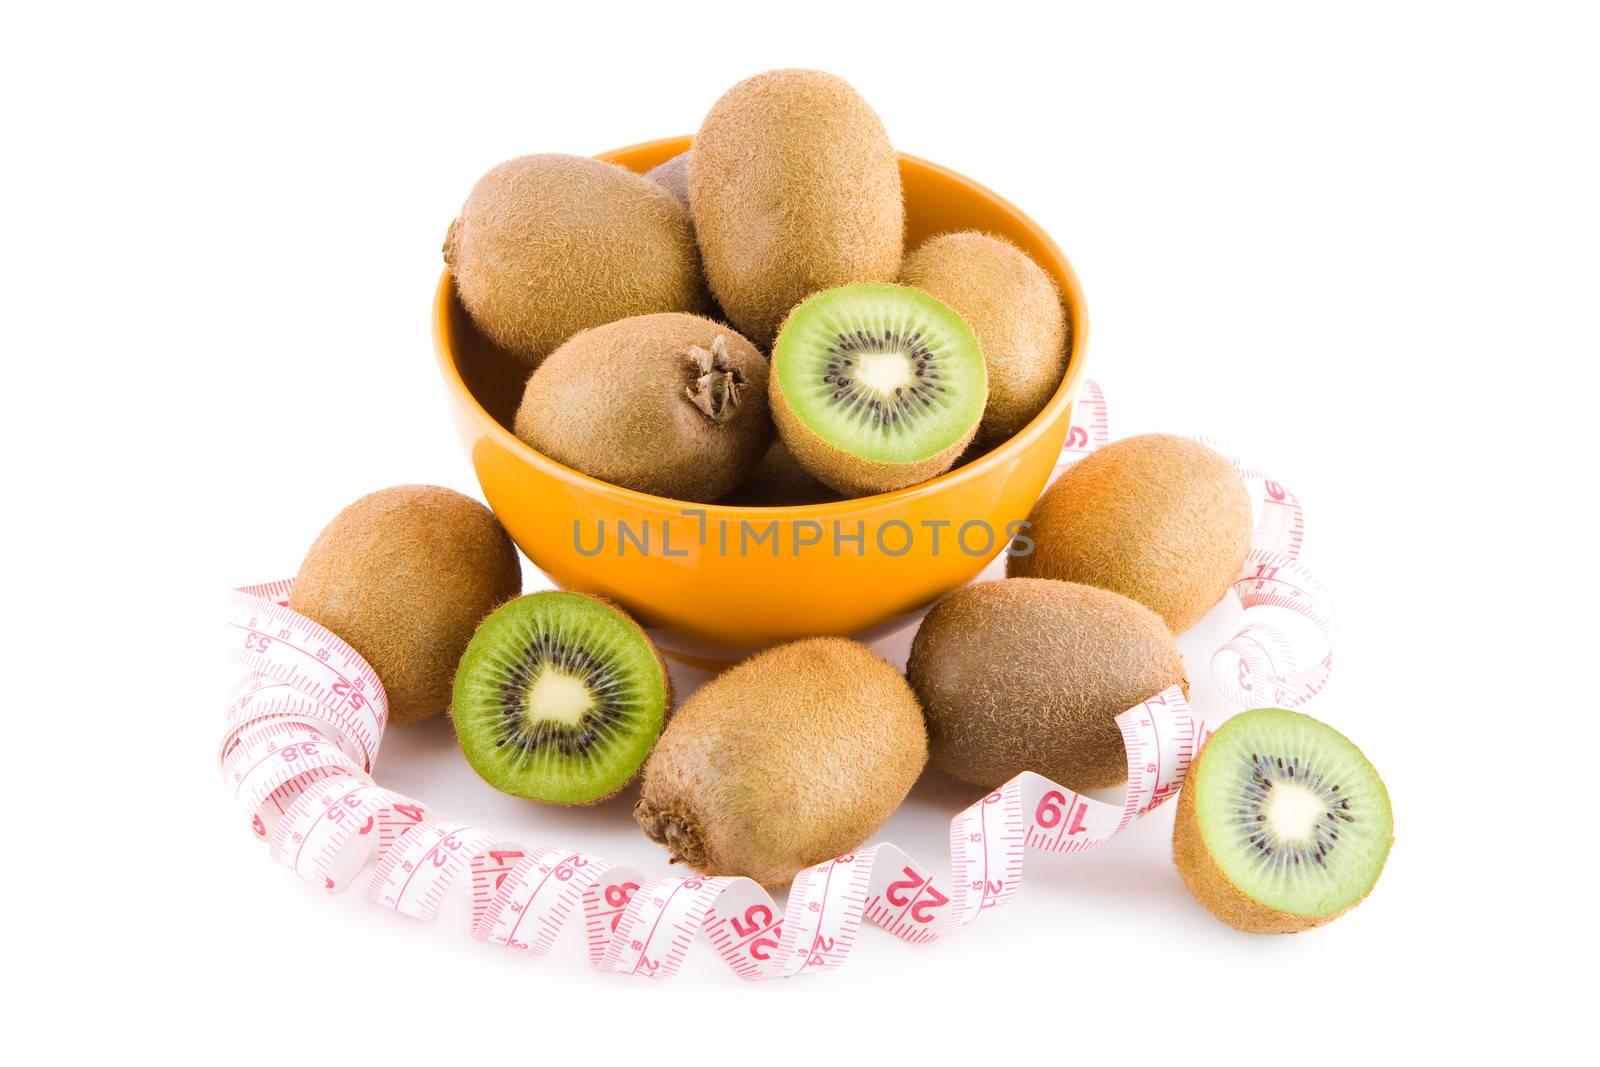 Kiwi fruits in porcelain bowl with measure tape